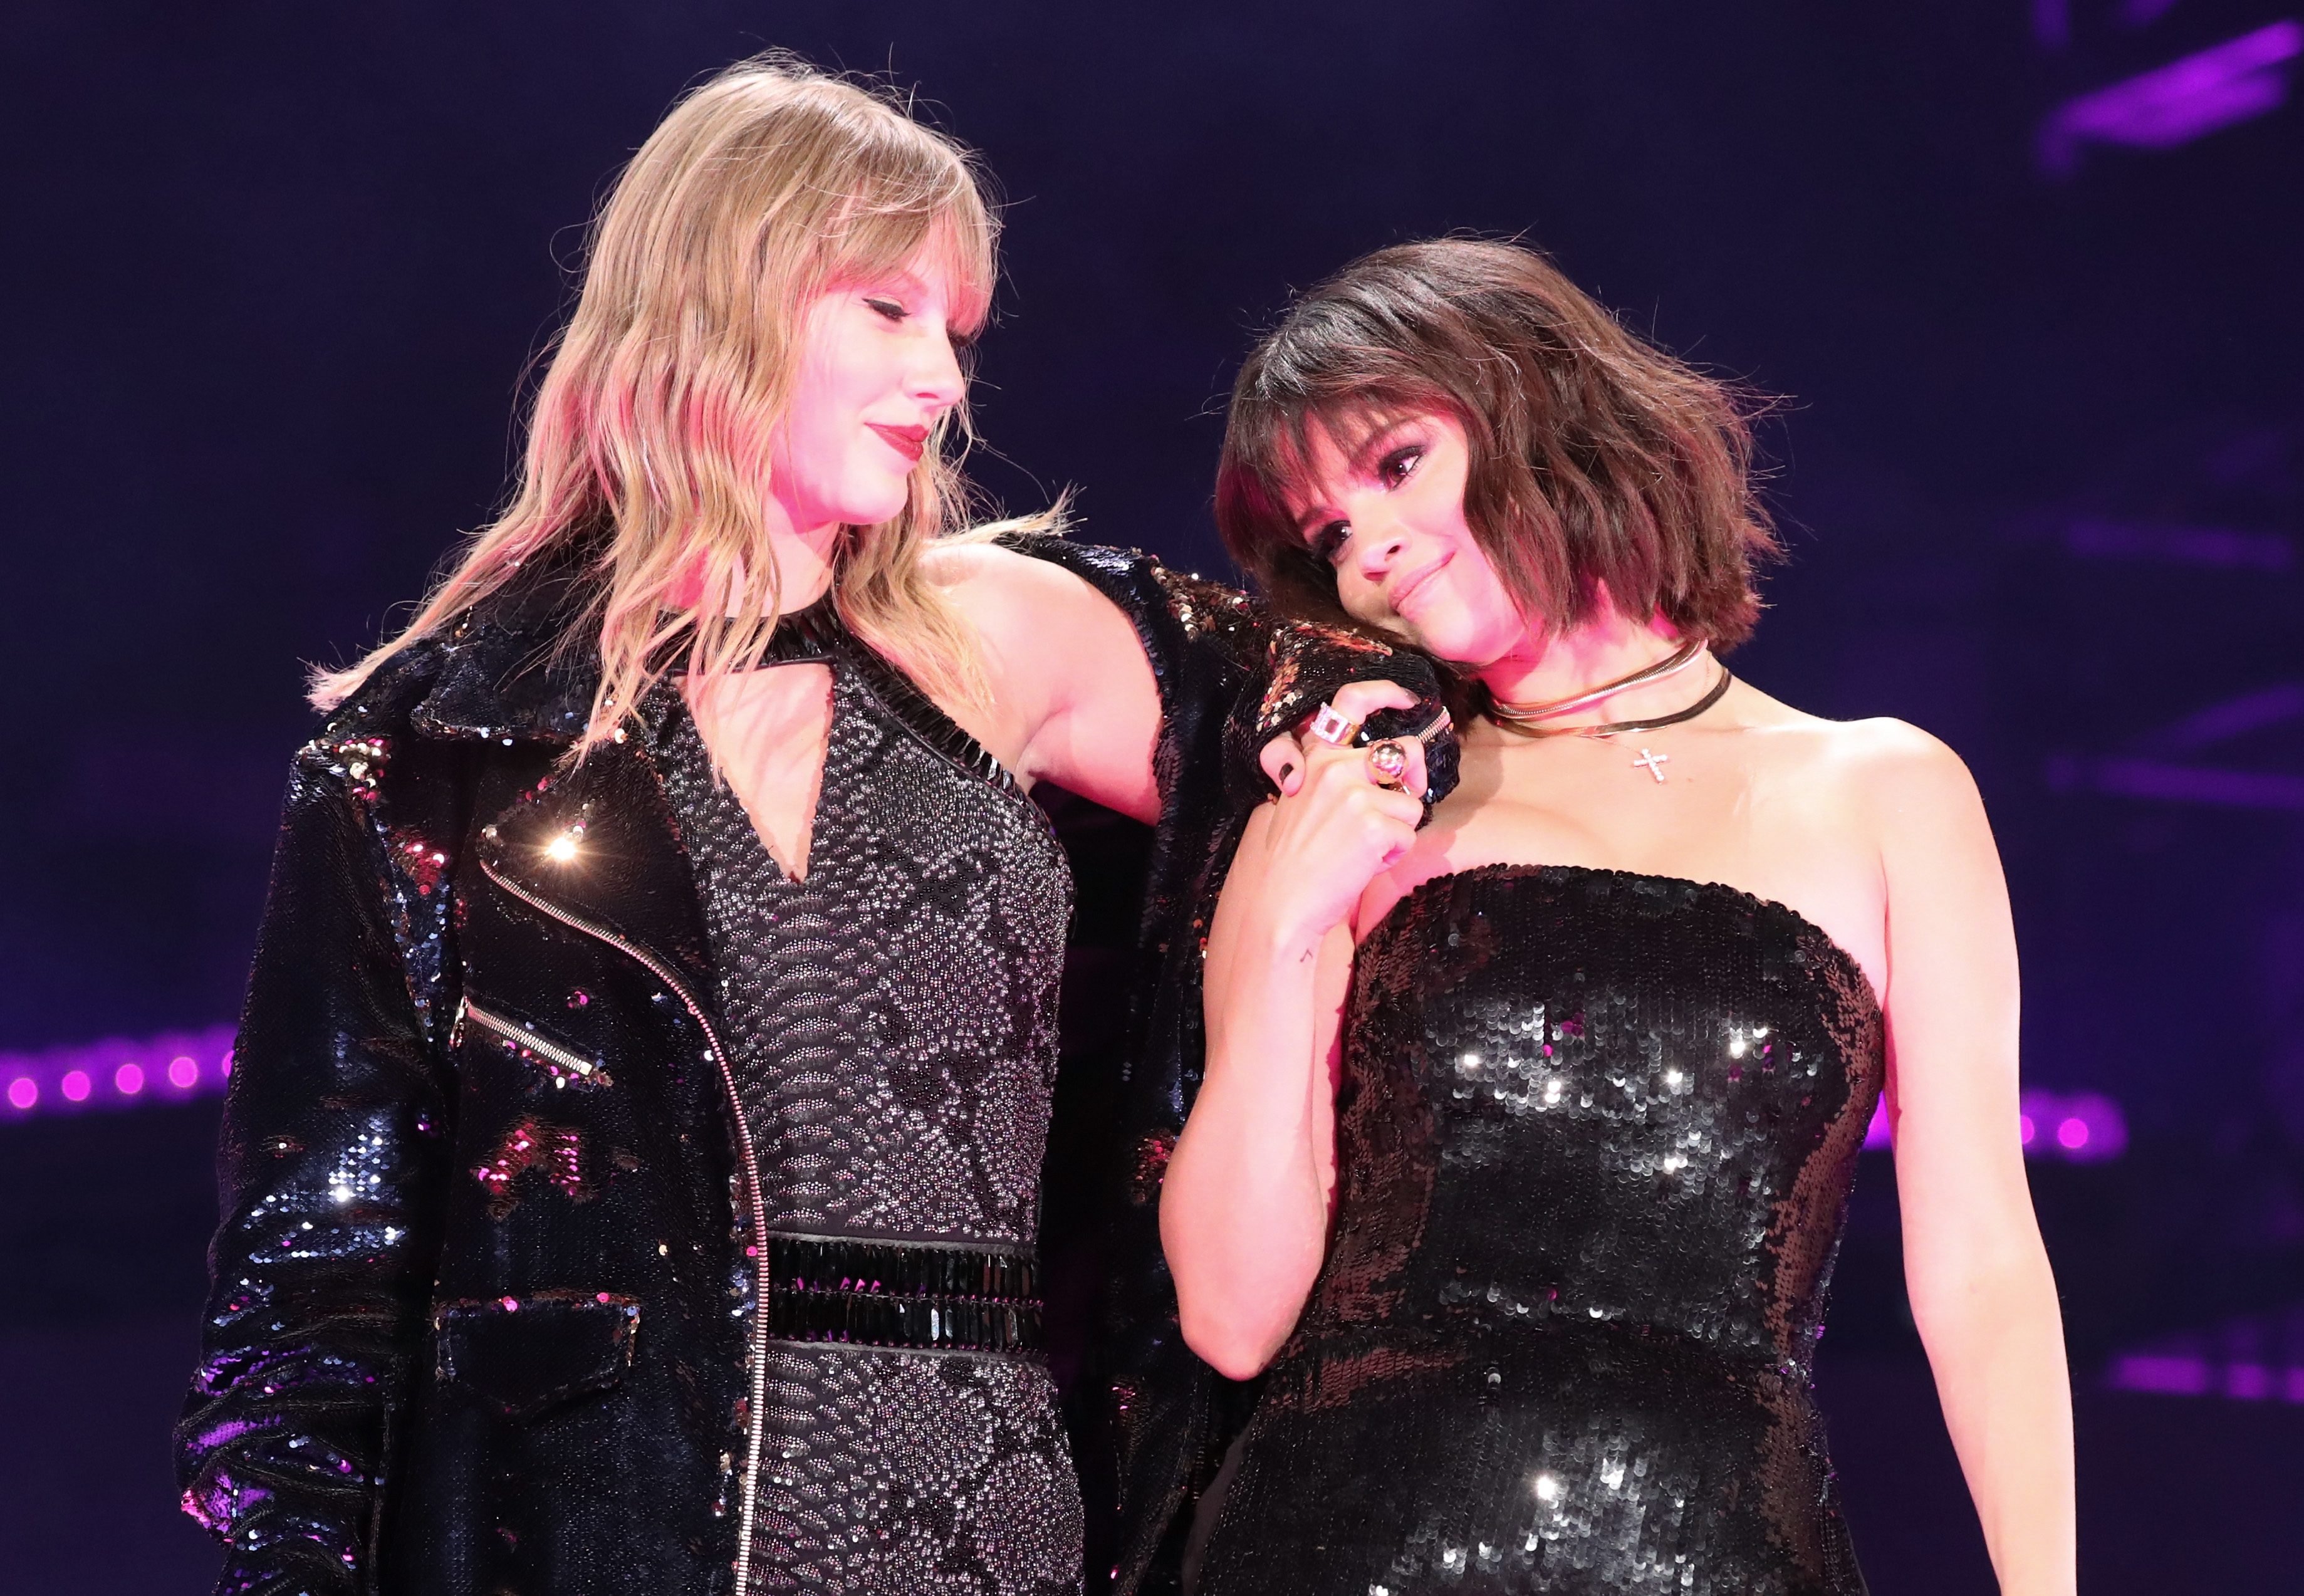 Taylor Swift and Selena Gomez on stage, wearing sequined outfits and smiling at each other